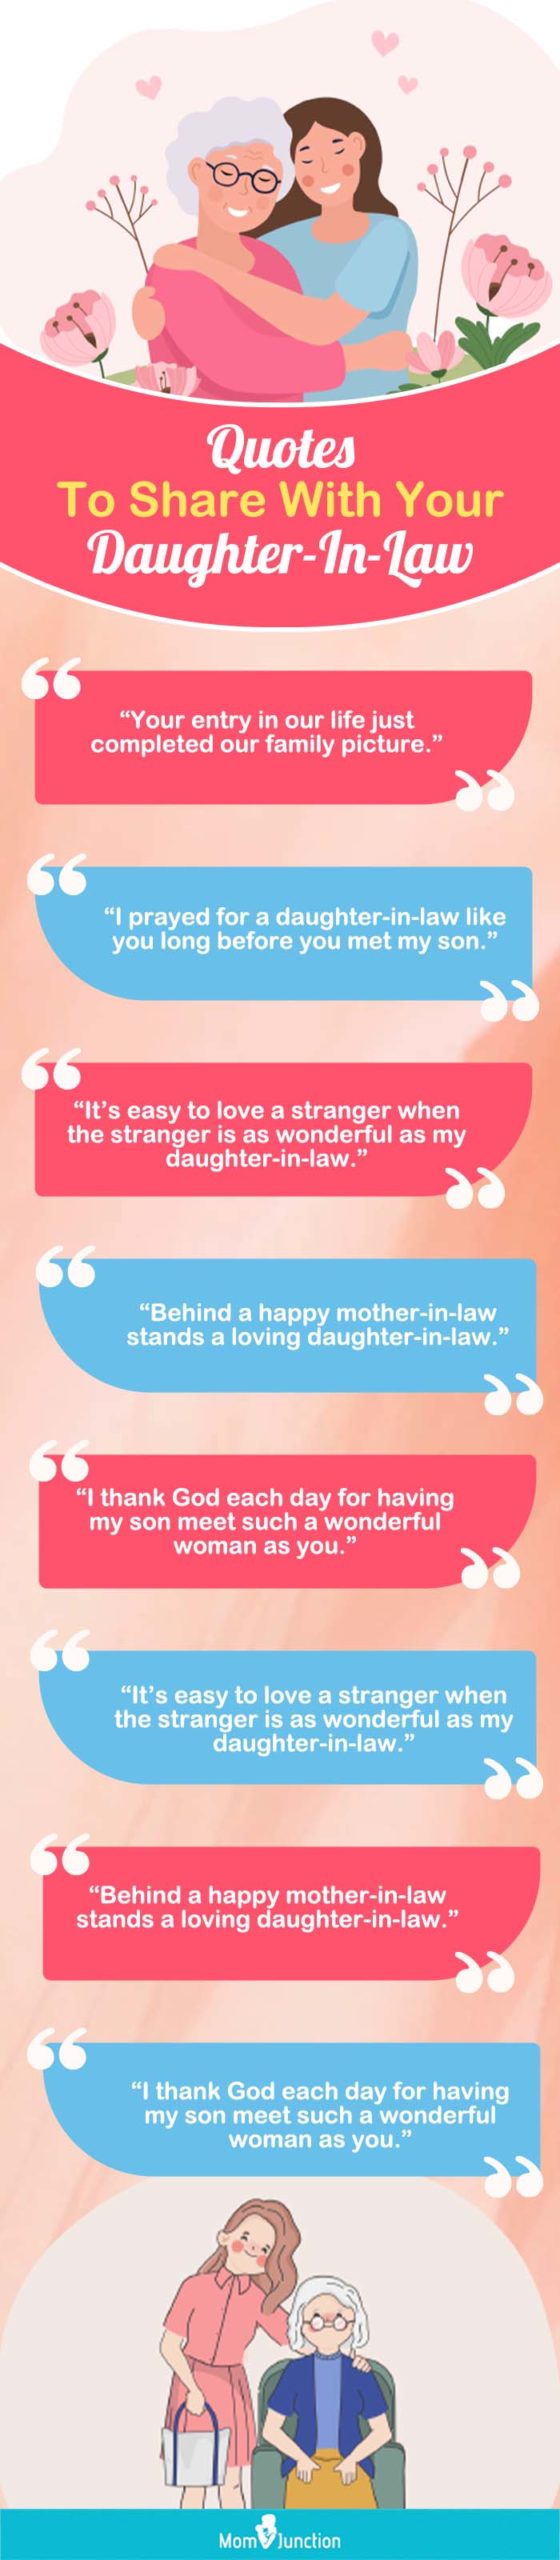 quotes to share with your daughter in law (infographic)